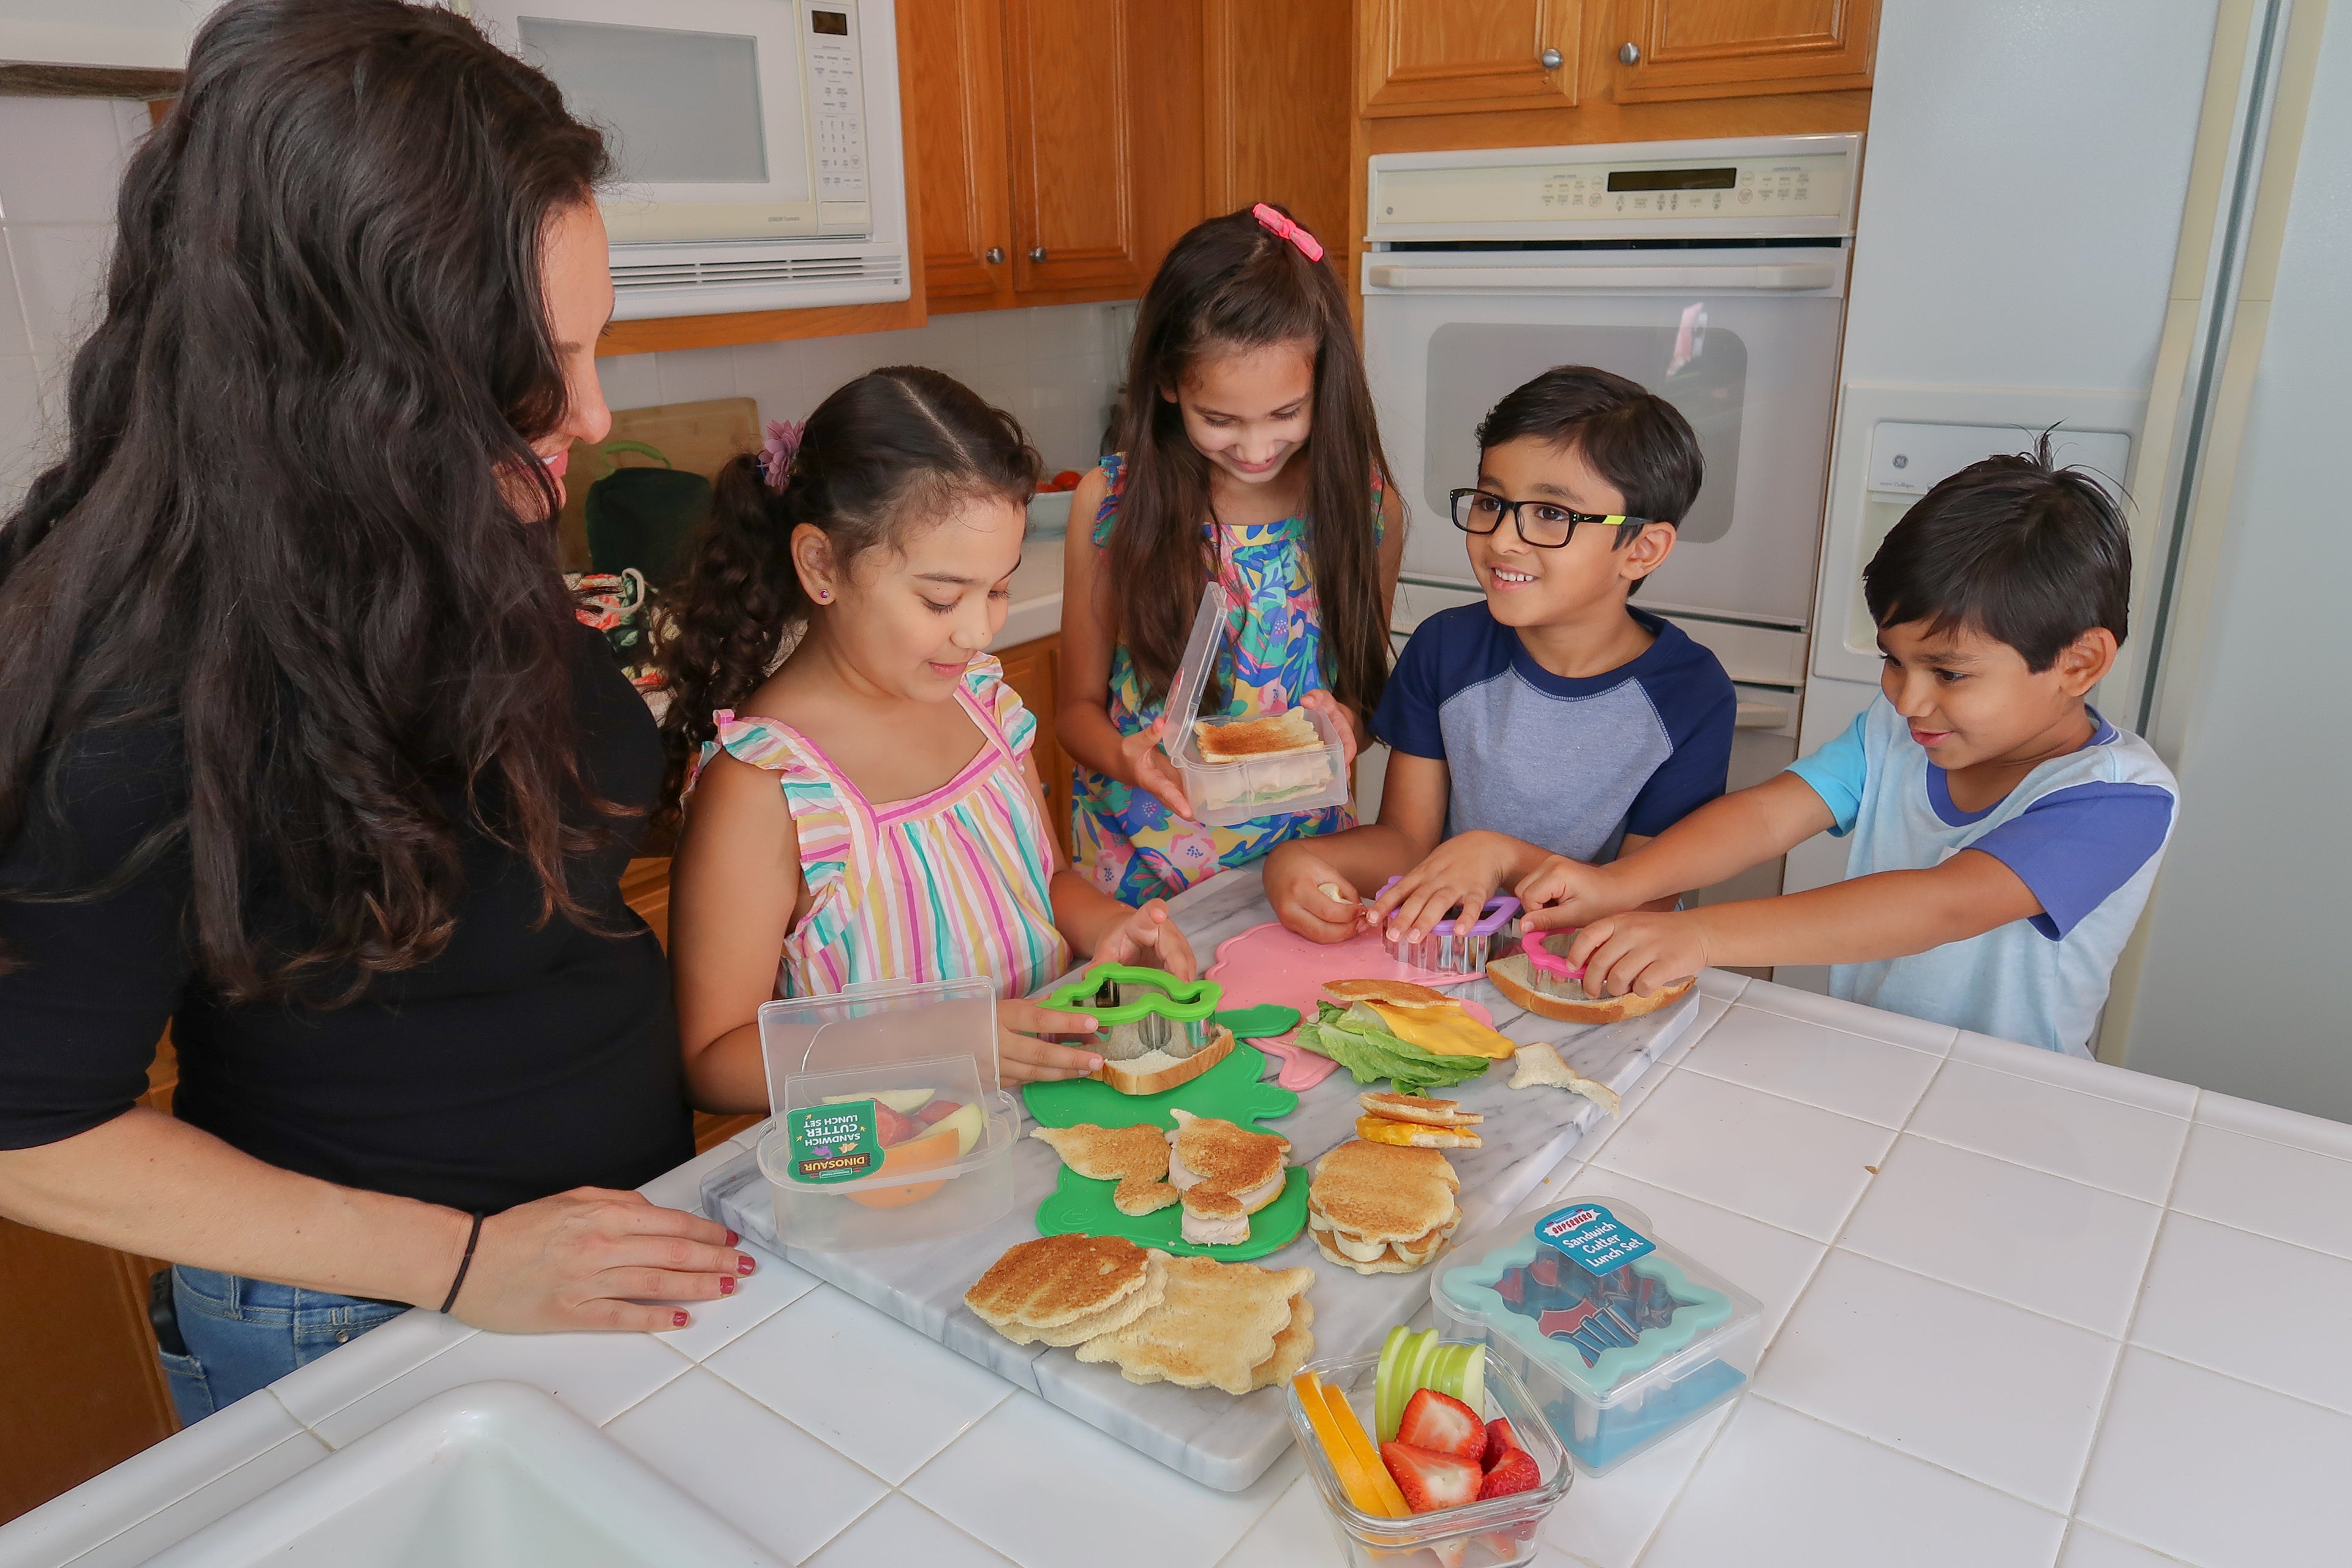 Lifestyle image of a family making sandwiches using the rainbows and unicorns cutter lunch set